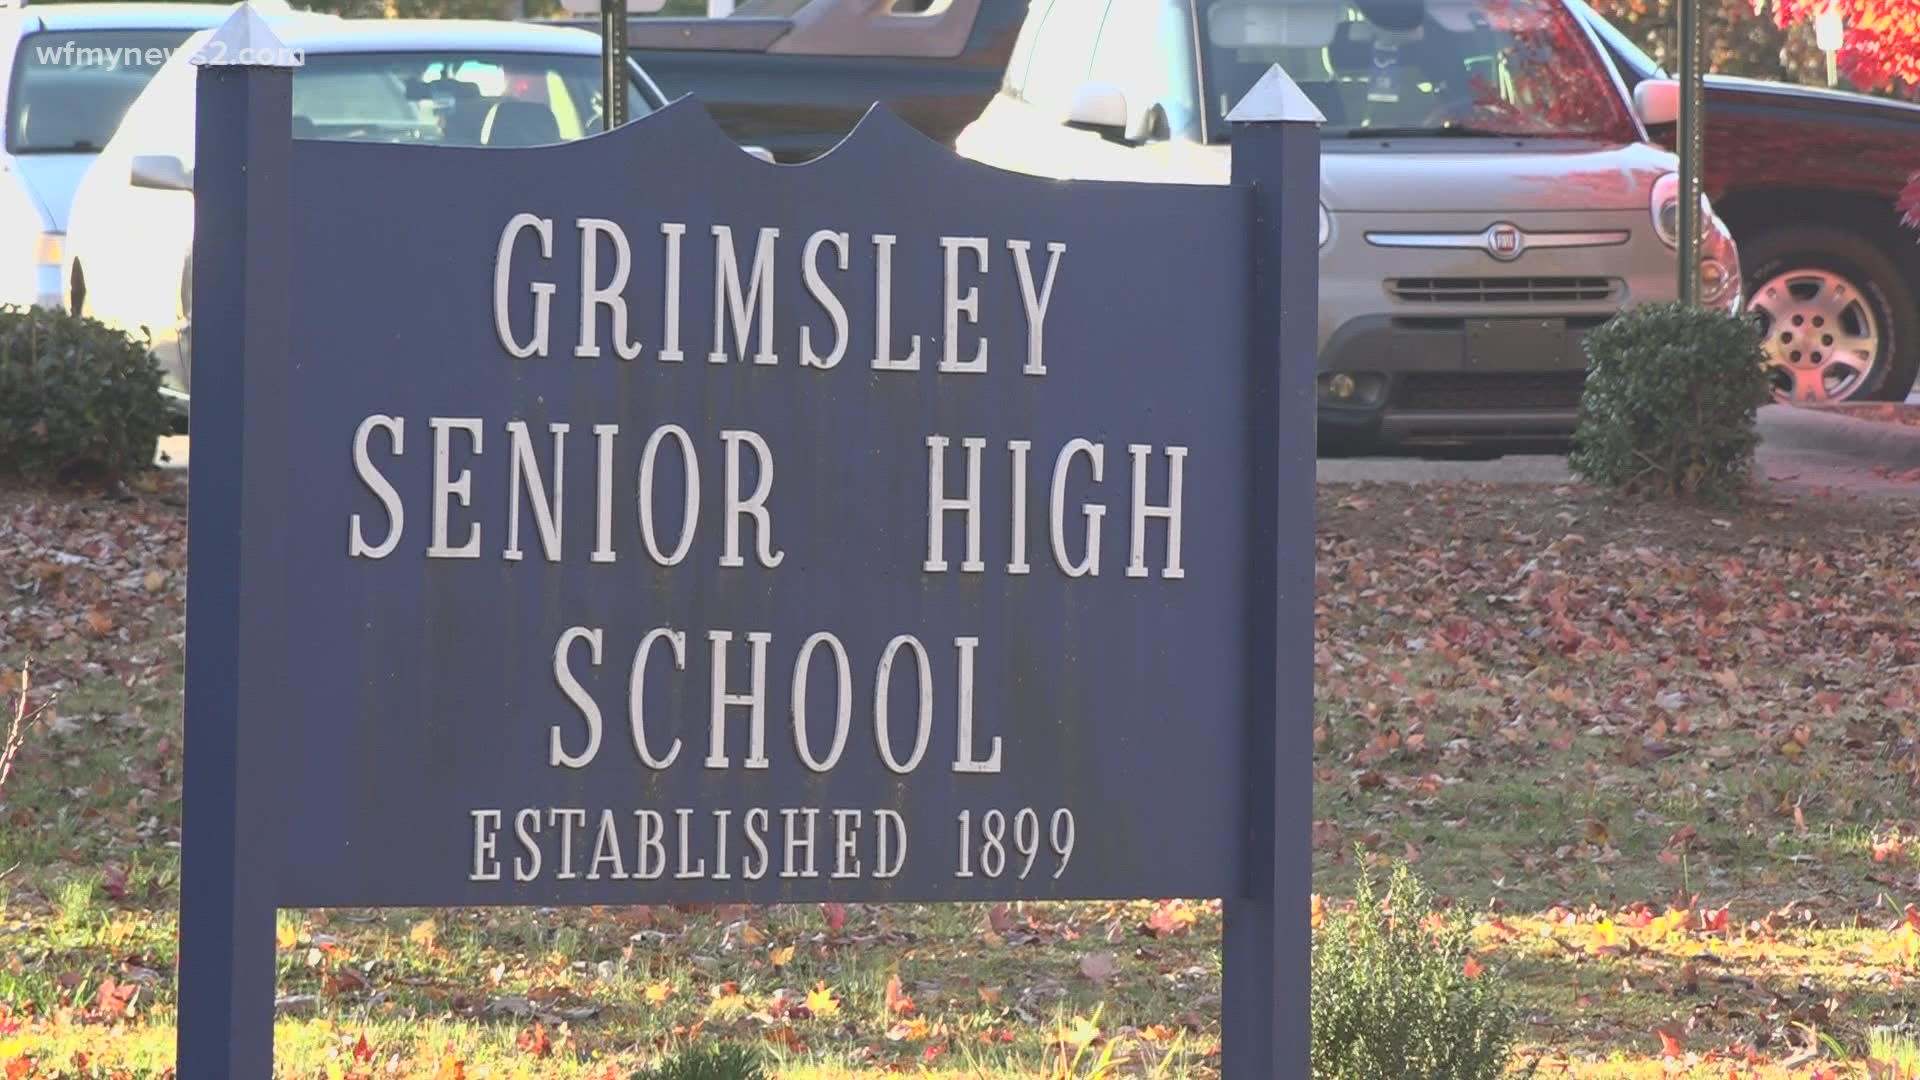 After a gun was found Wednesday at Grimsley High School, parents say they are concerned sending their kids to school.